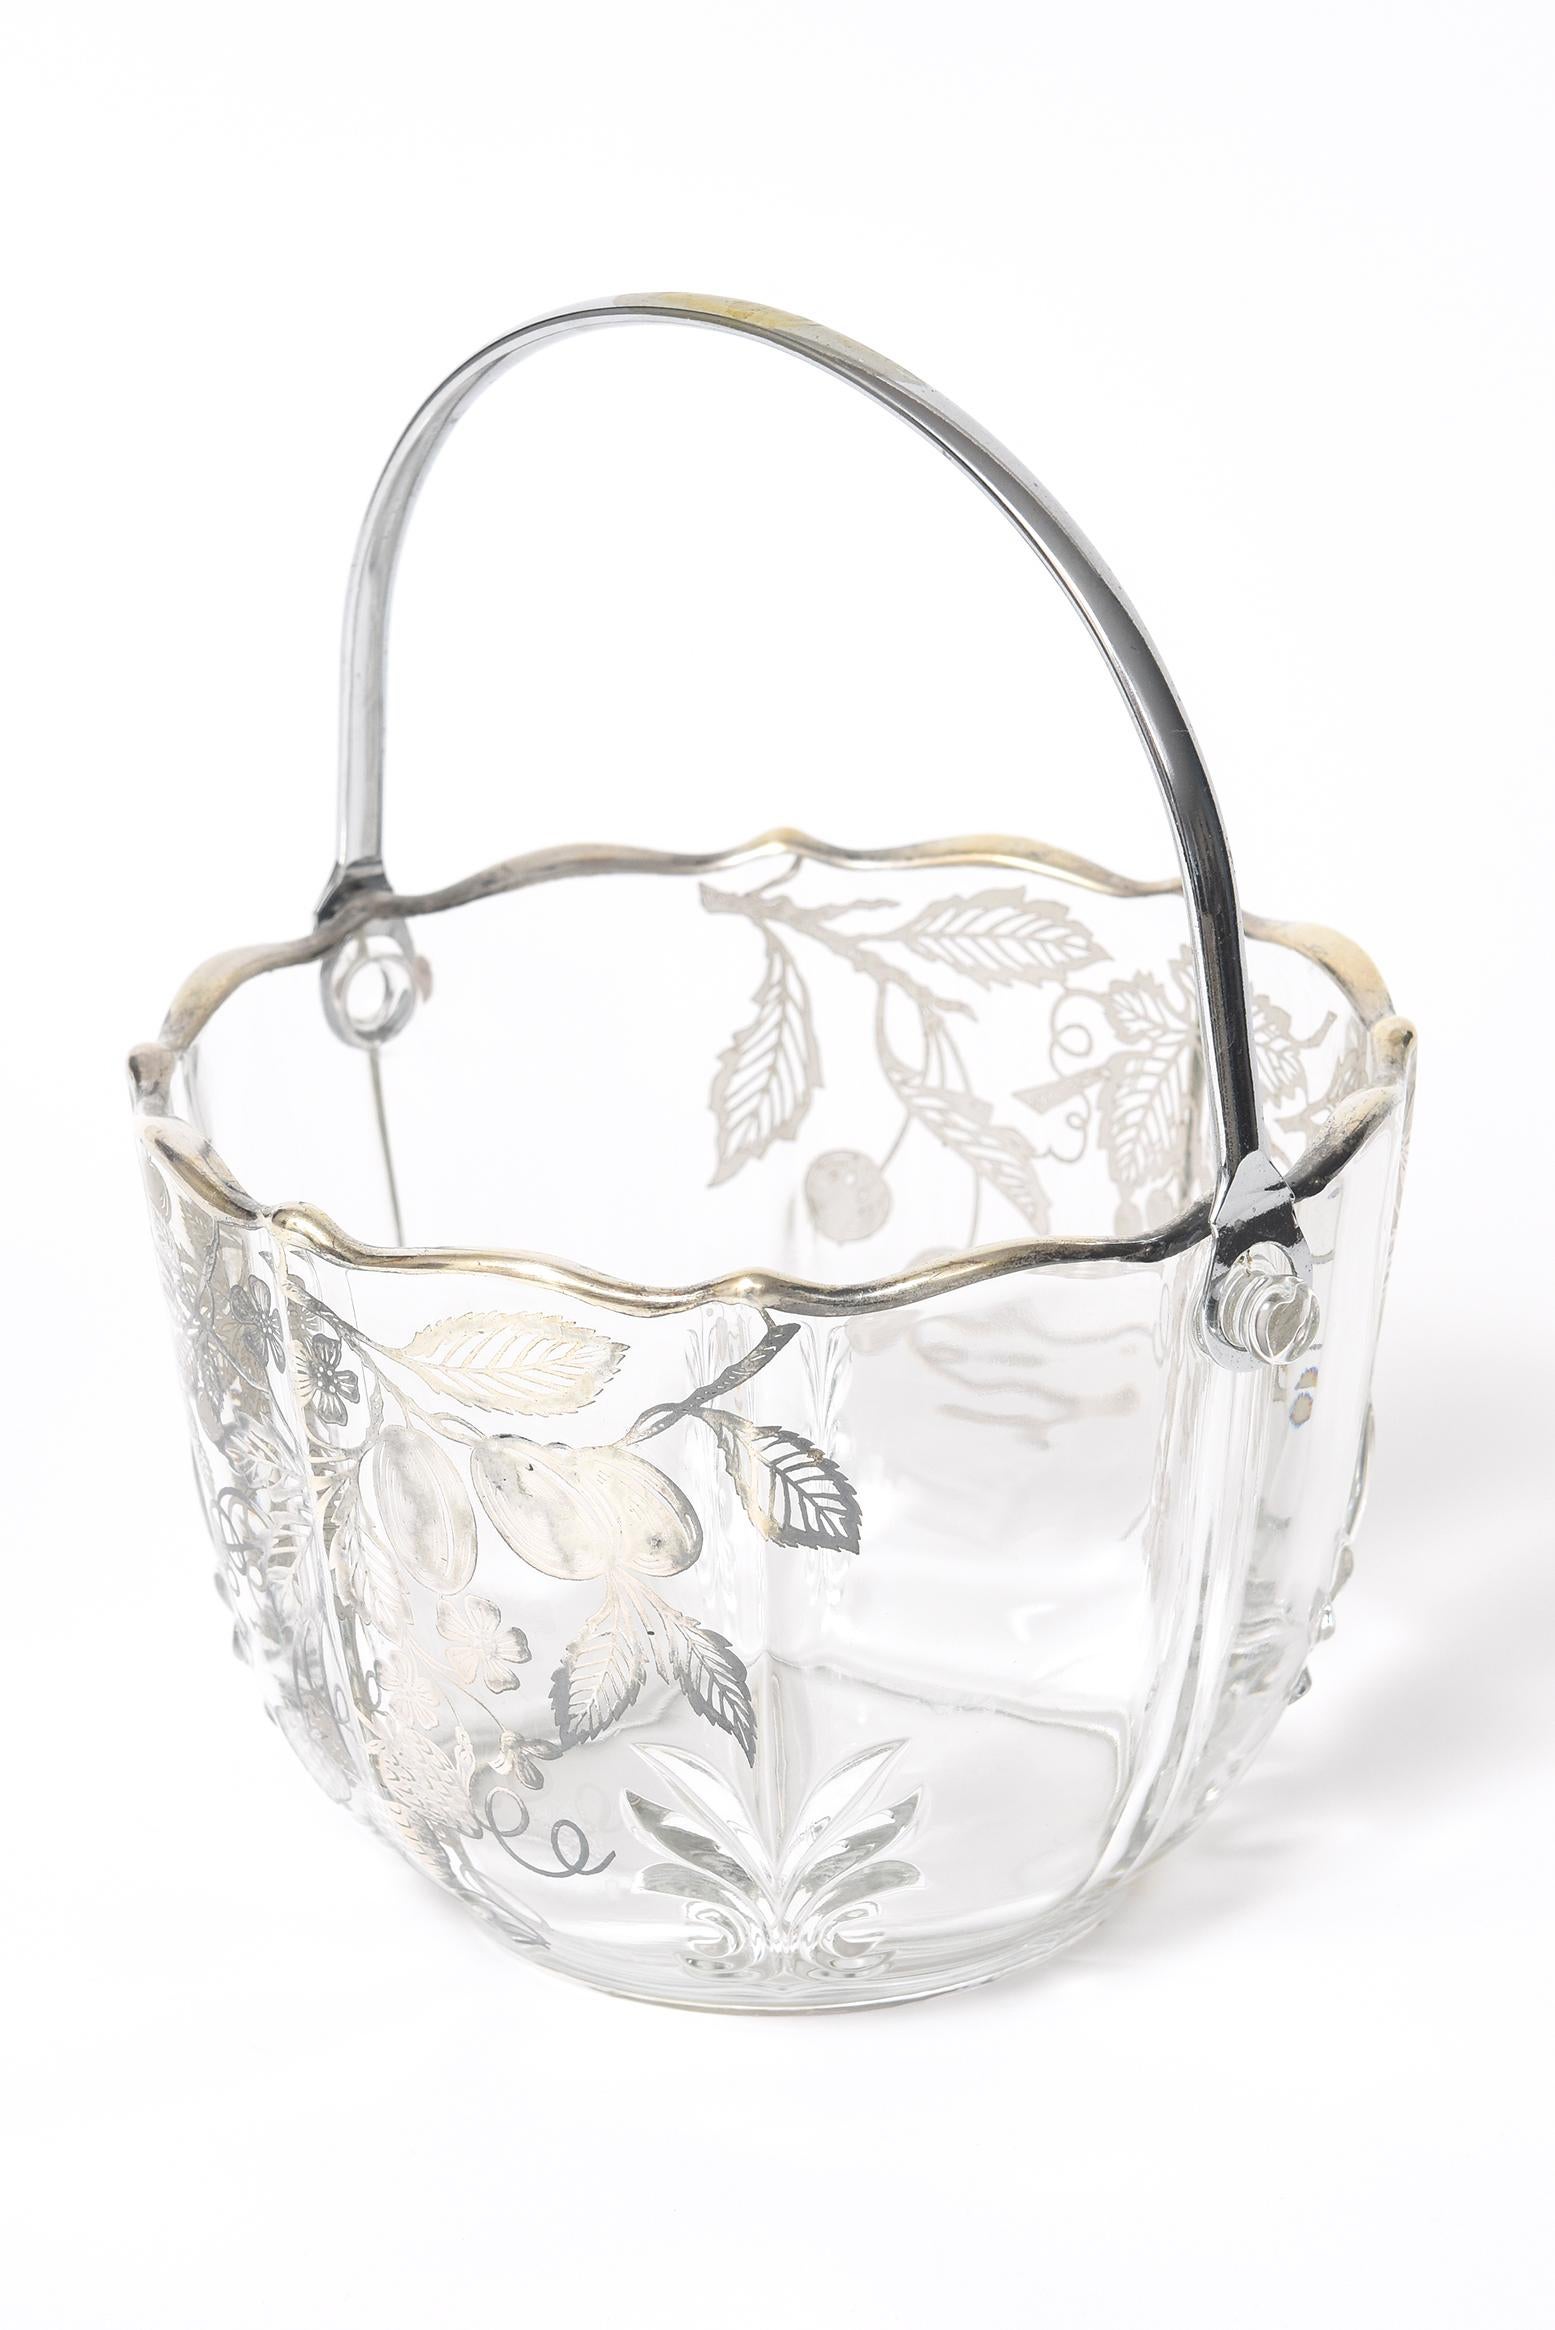 Lovely clear glass sterling silver overlay basket with leaf design in 4 areas along the bucket base. In two areas there are strawberries, grapes, cherries, leaves and flowers. The handle is chrome plated brass. Marked Sterling in the design. The